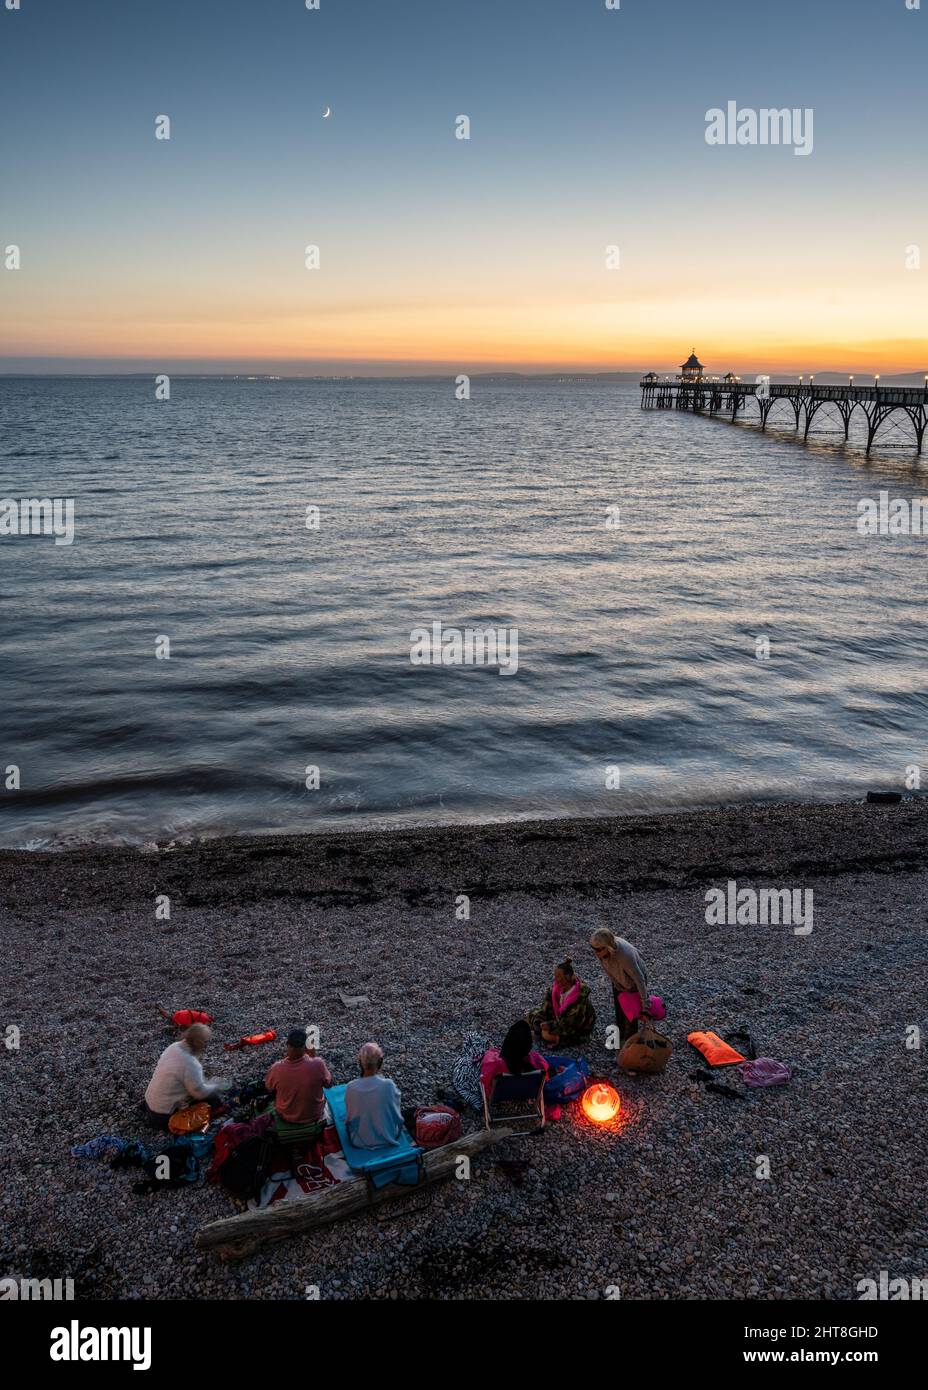 Swimmers gather at sunset on Clevedon Beach in Somerset, with Clevedon Pier and the Bristol Channel behind. Stock Photo